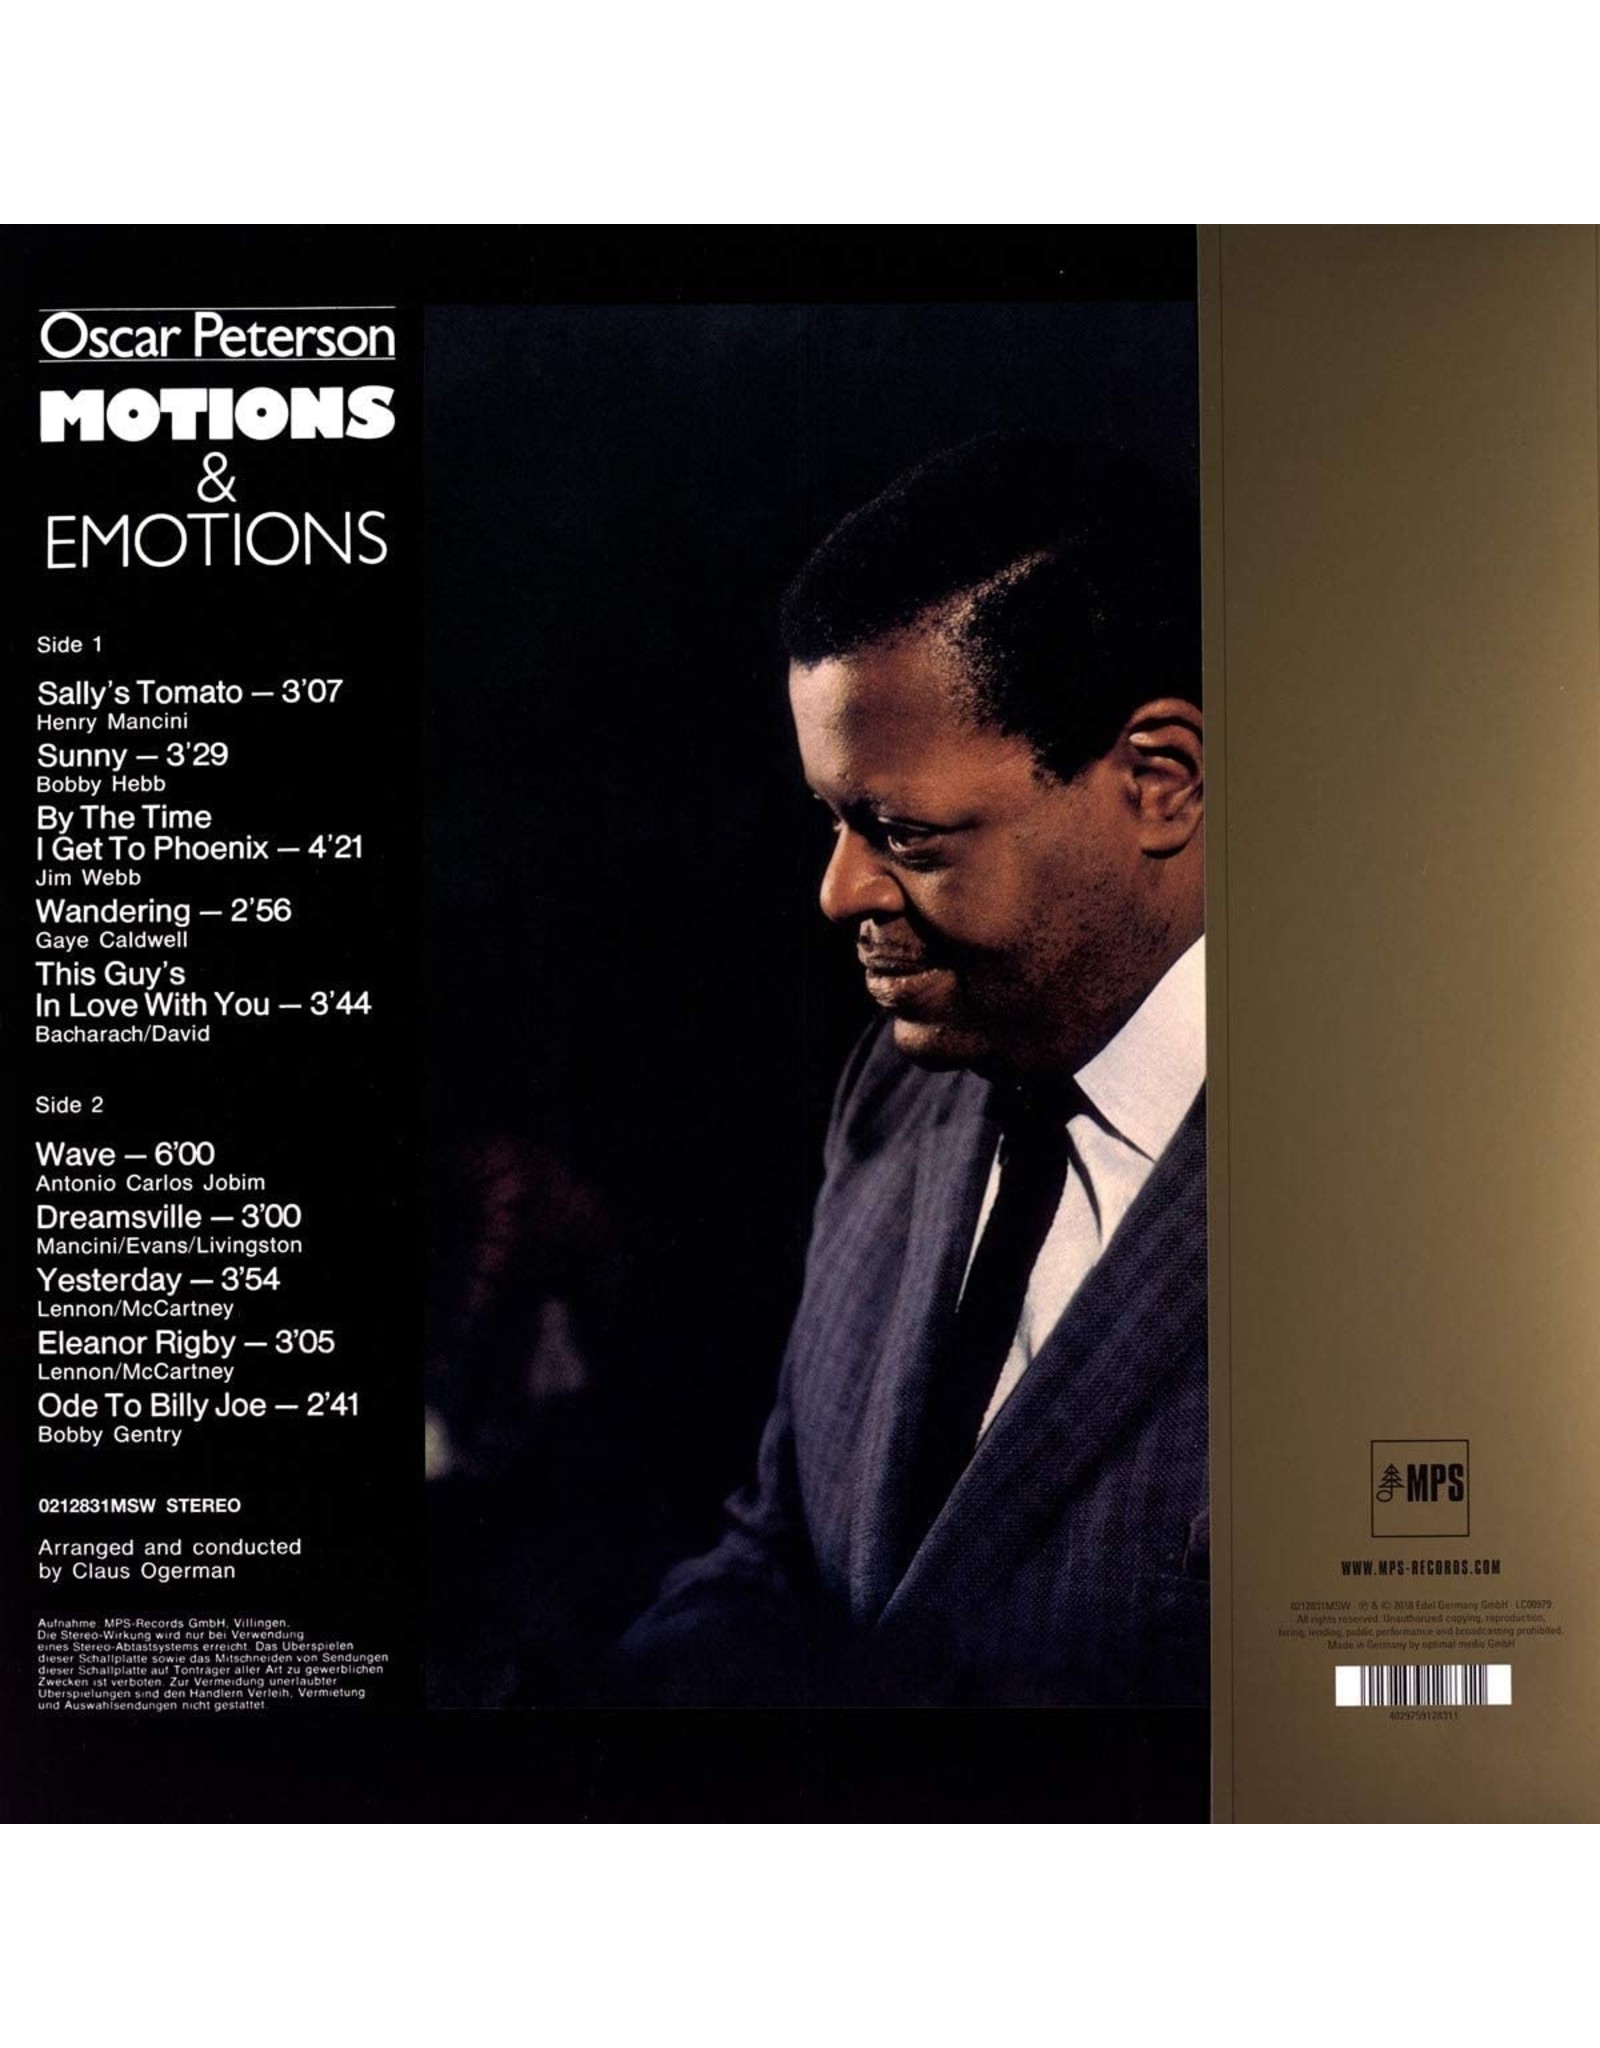 Oscar Peterson - Motions & Emotions (MPS AAA Series)